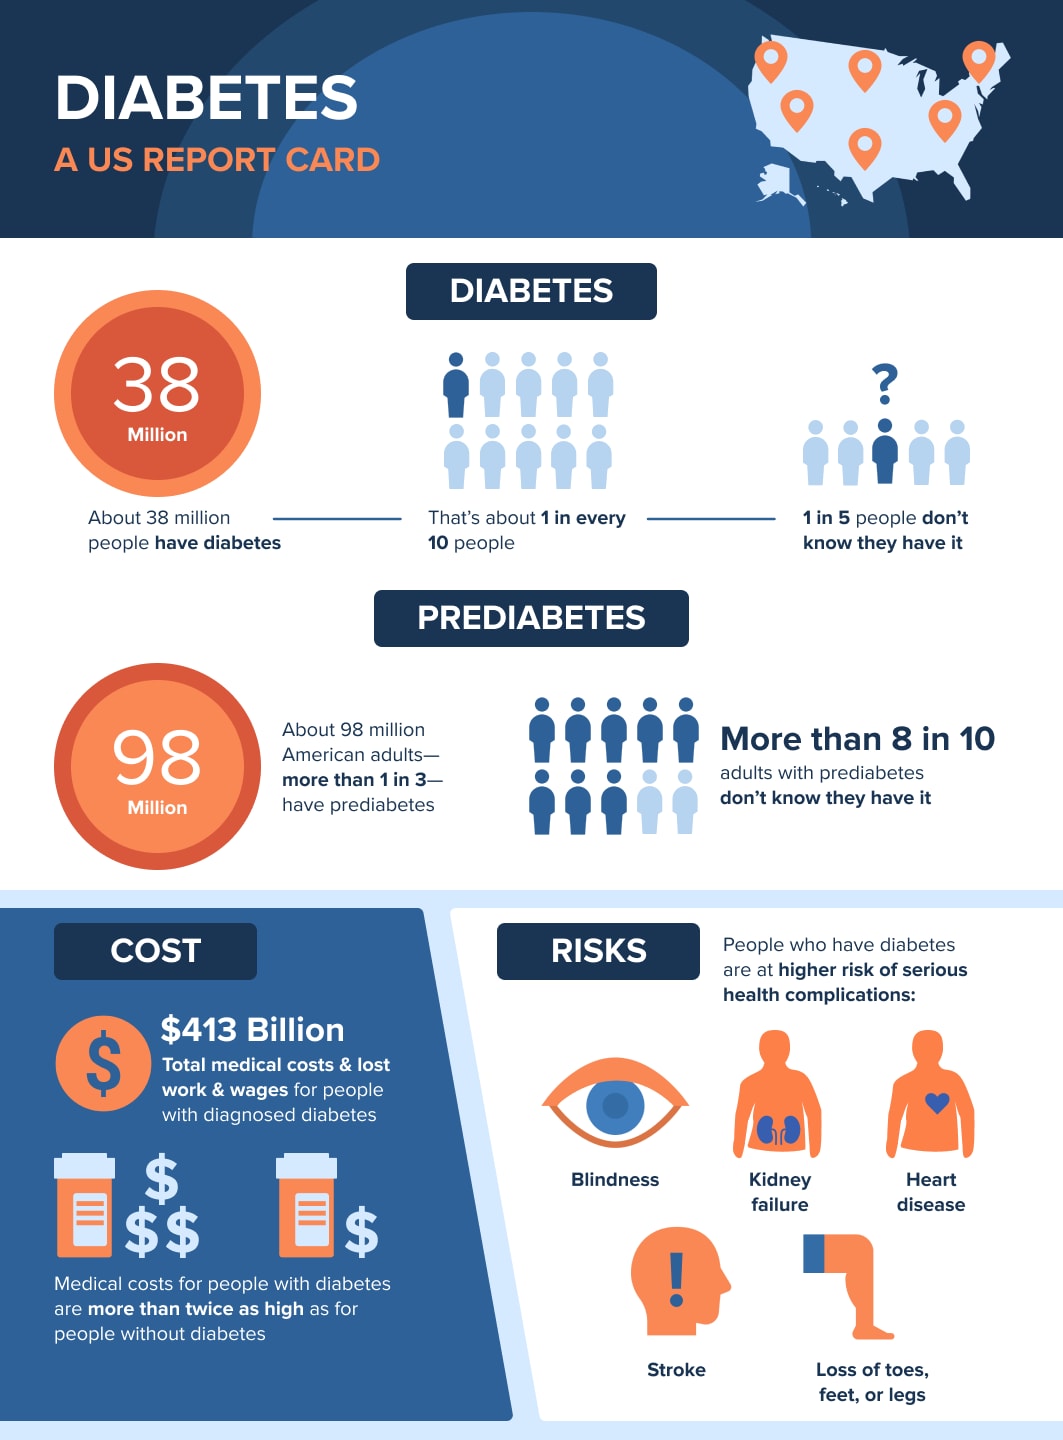 diabetes infographic by the CDC